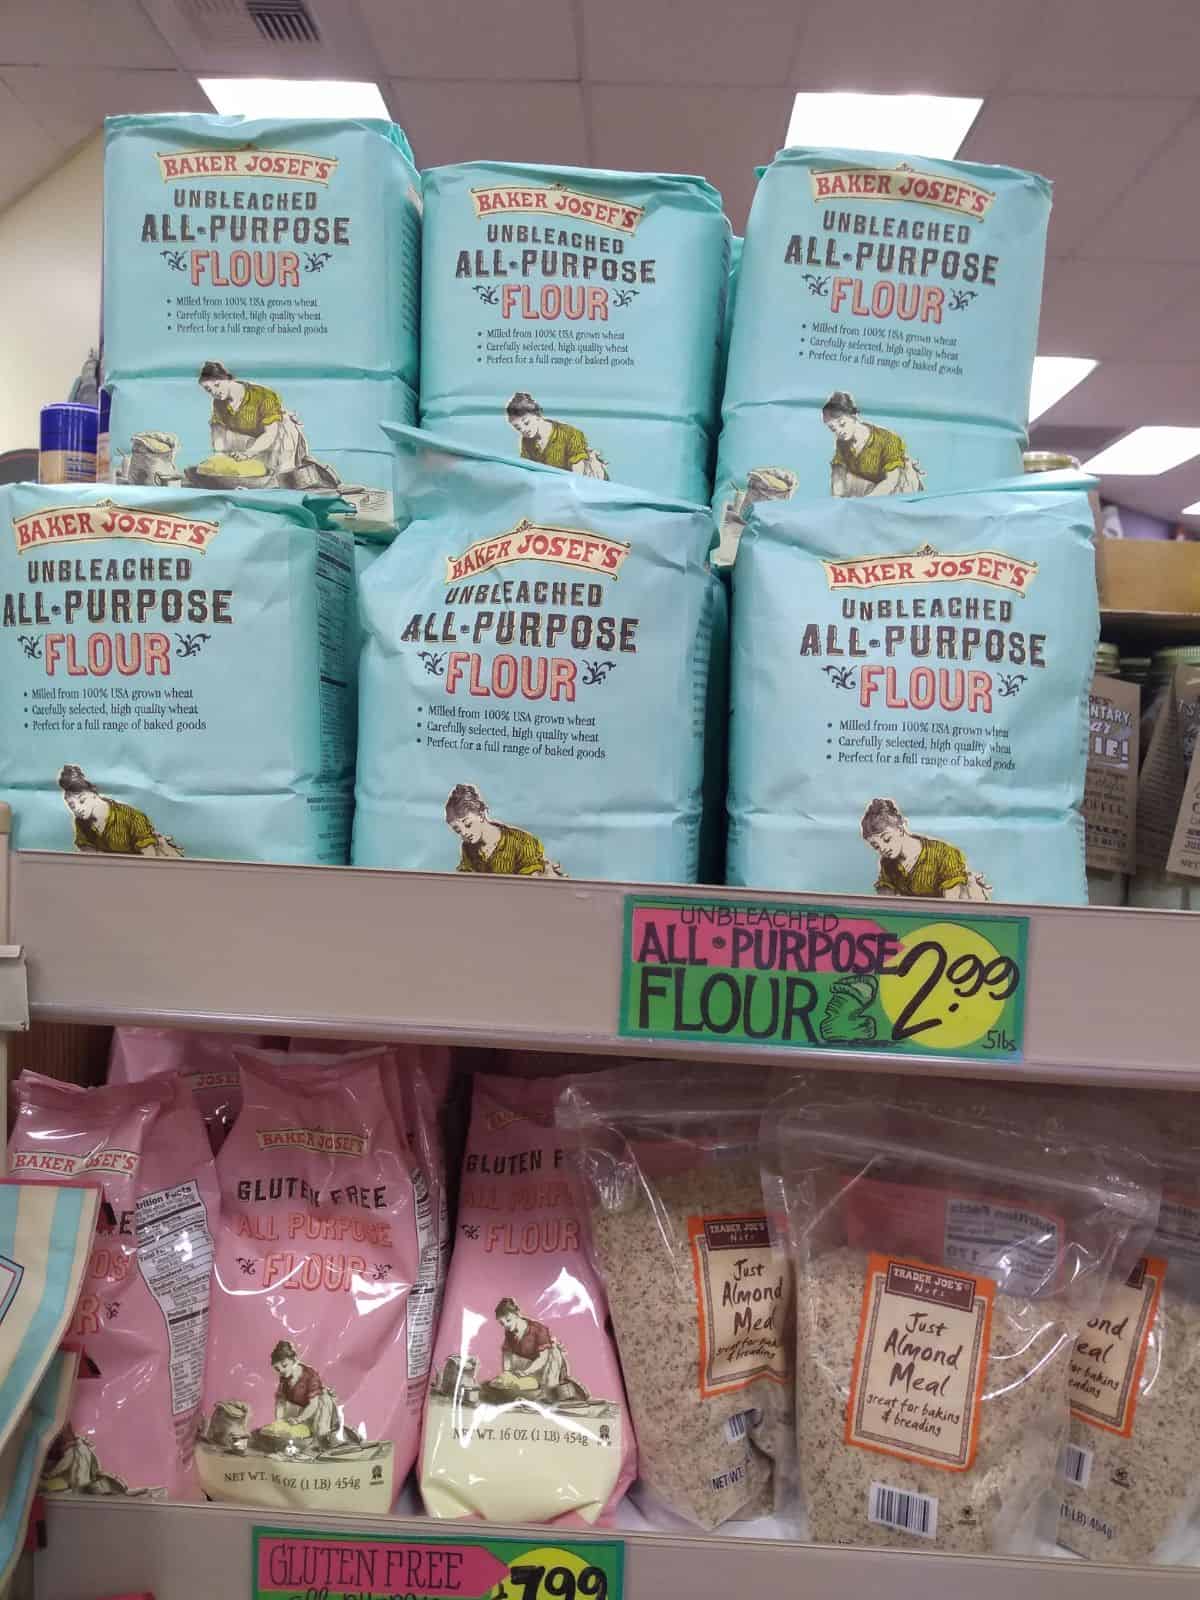 Bags of Baker Josef's Unbleached All Purpose Flour sit on the shelf above  bags of gluten free flour and Just Almond meal.